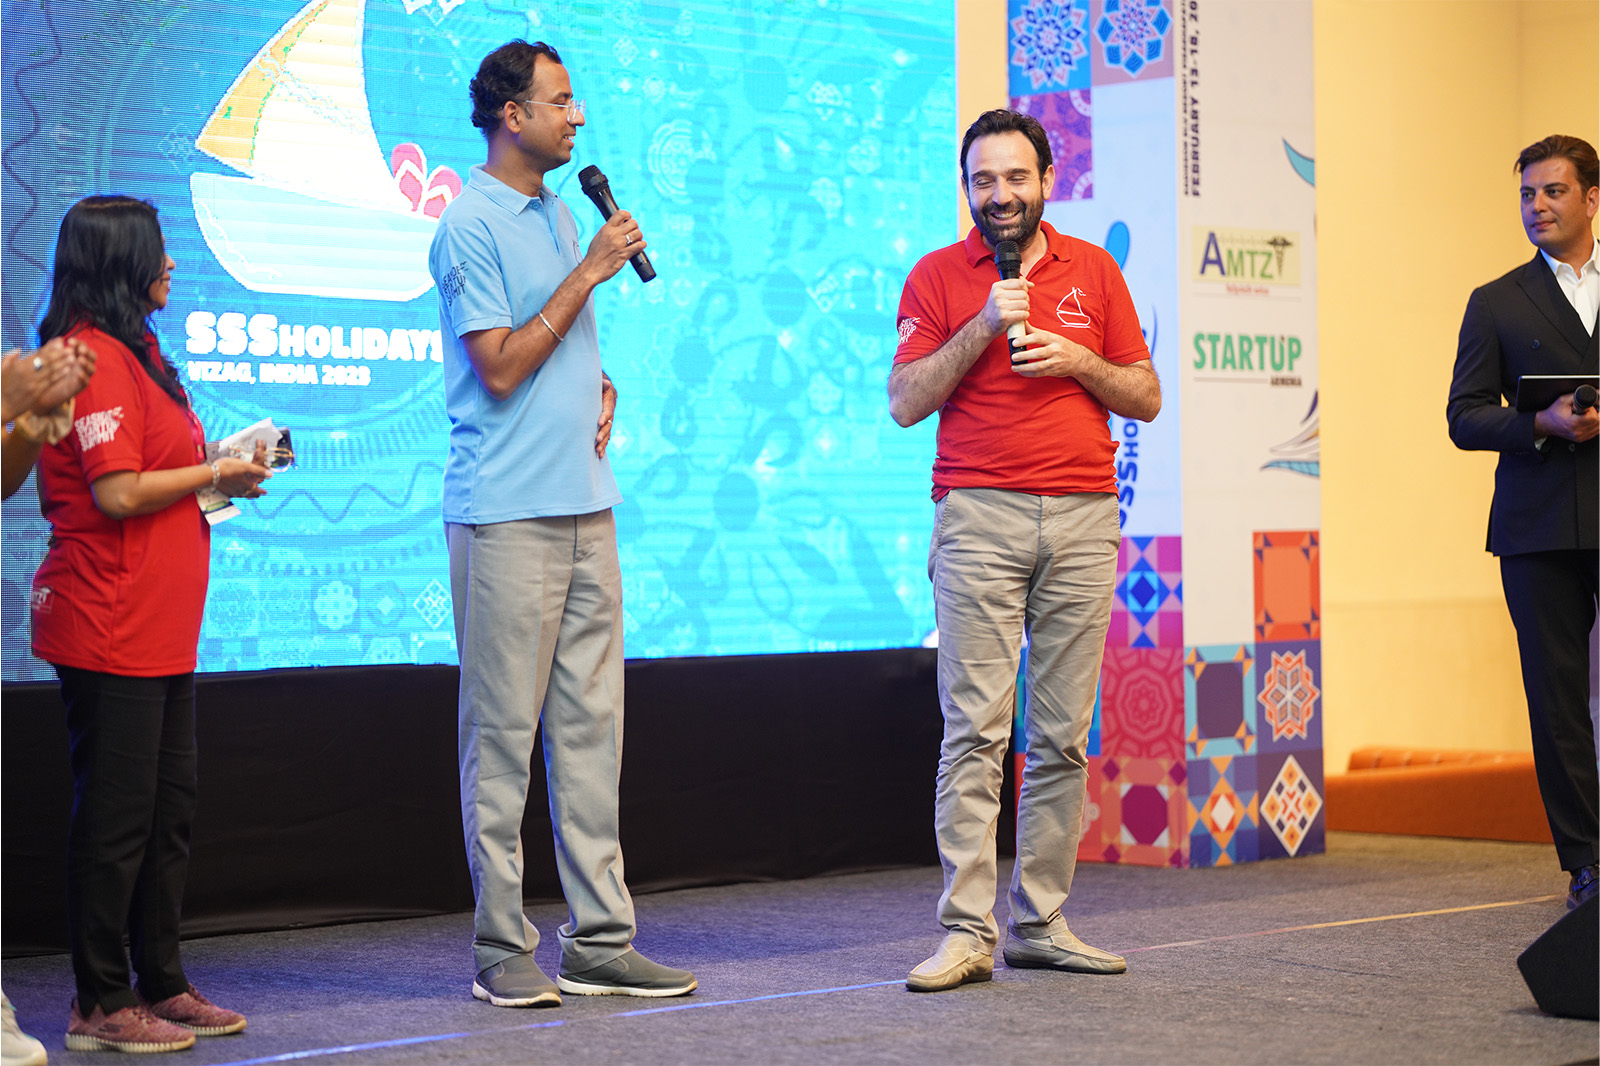 Collaborative Encounter: Dr. Jitendra Sharma, MD & Founder CEO of AMTZ, Connects with Dr. Hakob Hakobyan, Founder of Seaside Startup Summit during SSS event Health Care Medical Technology in India